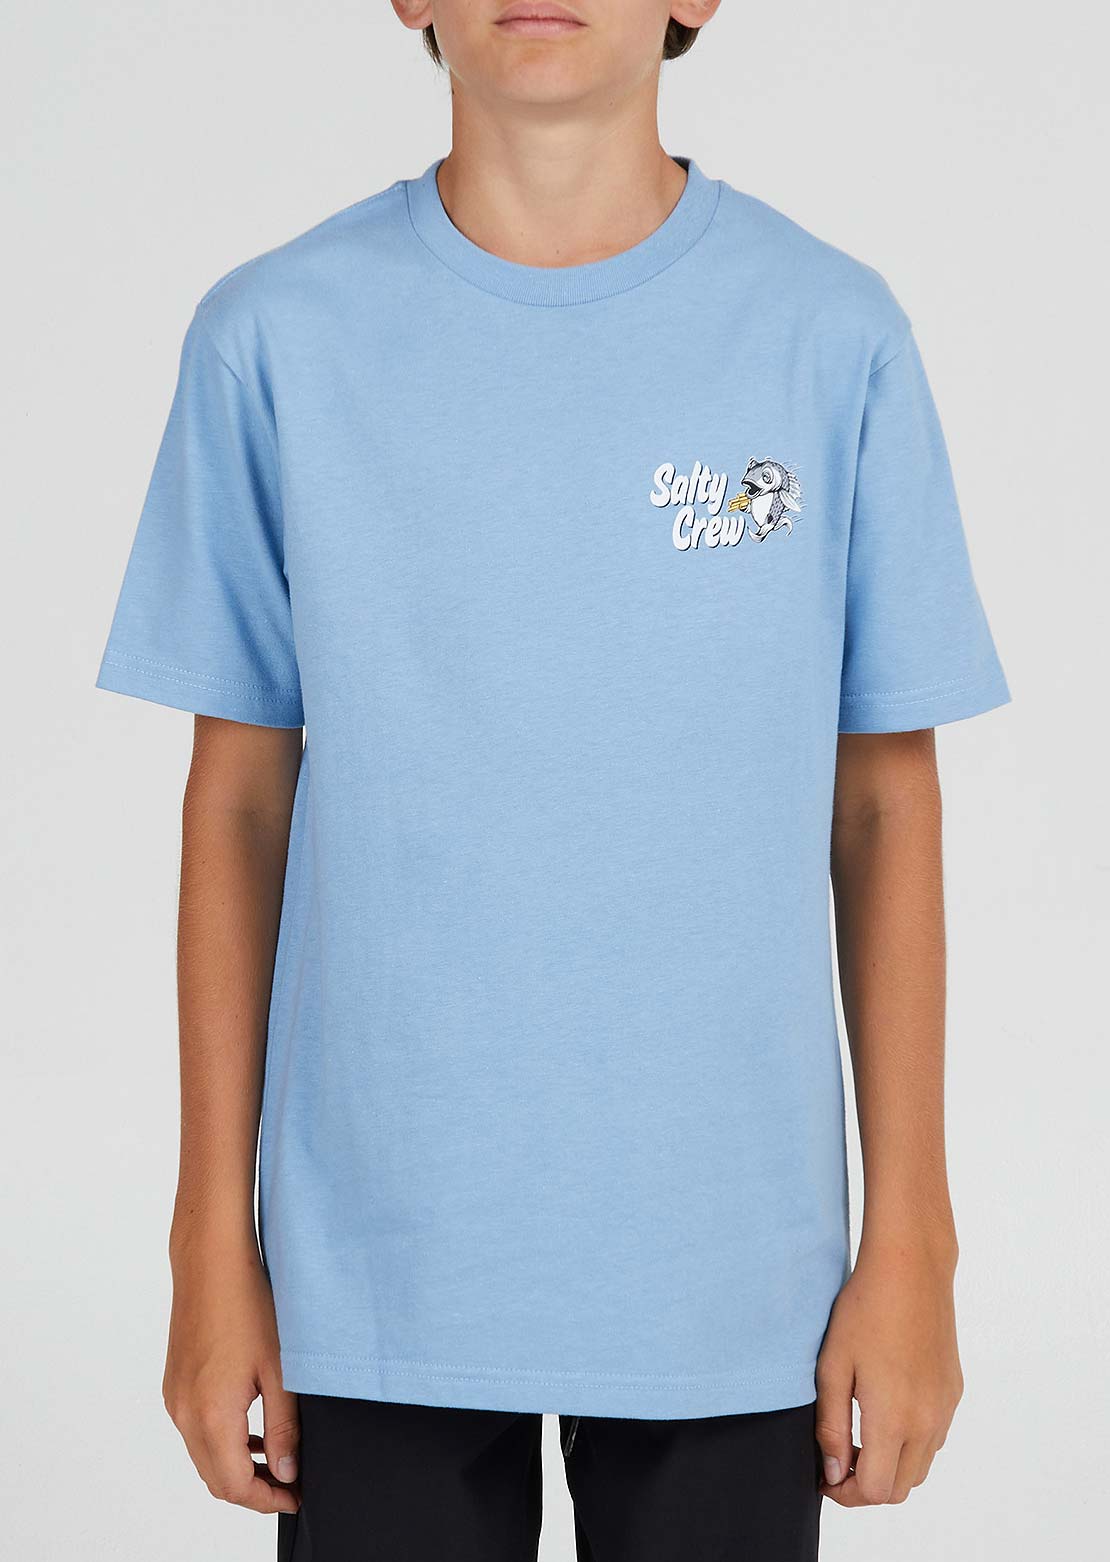 Salty Crew Junior Fish and Chips T-Shirt Marine Blue